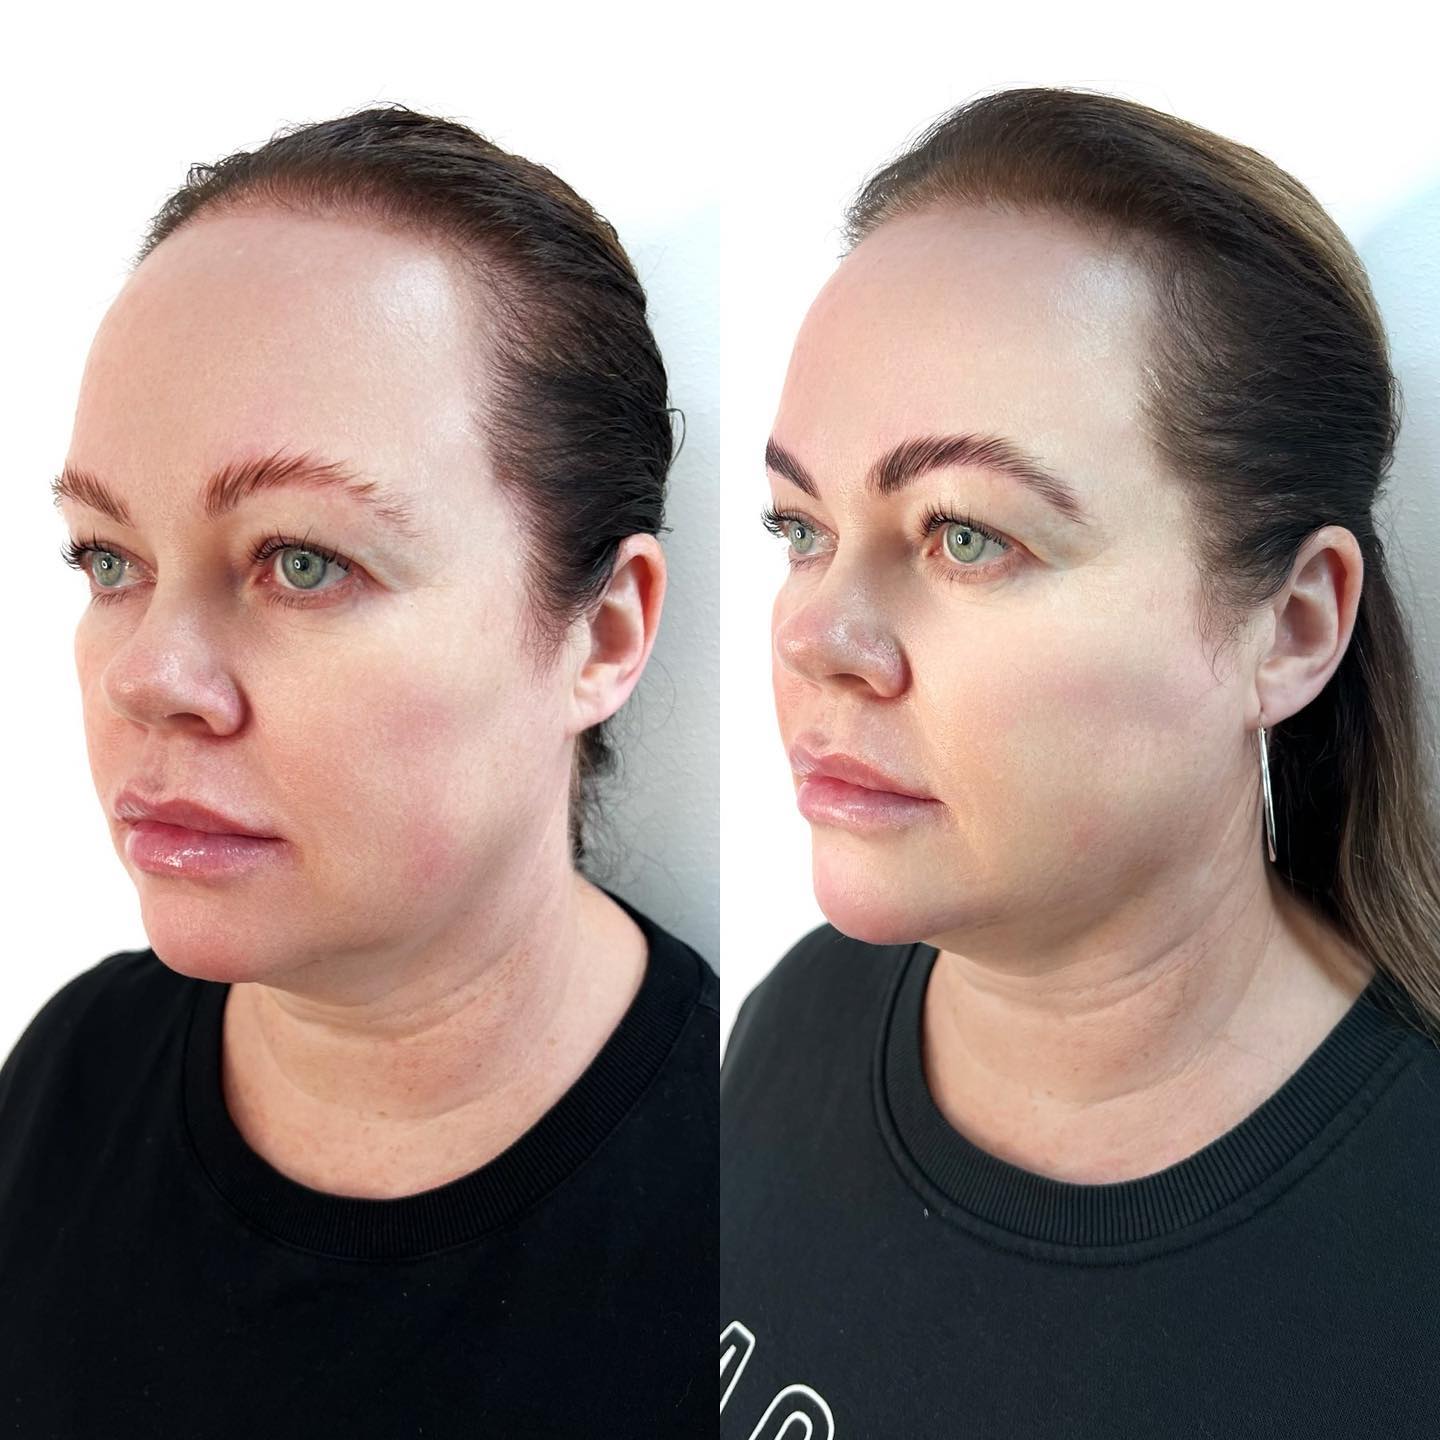 Comparison Photo Of Woman Before And After A Dermal Fillers Procedure In Wollongong